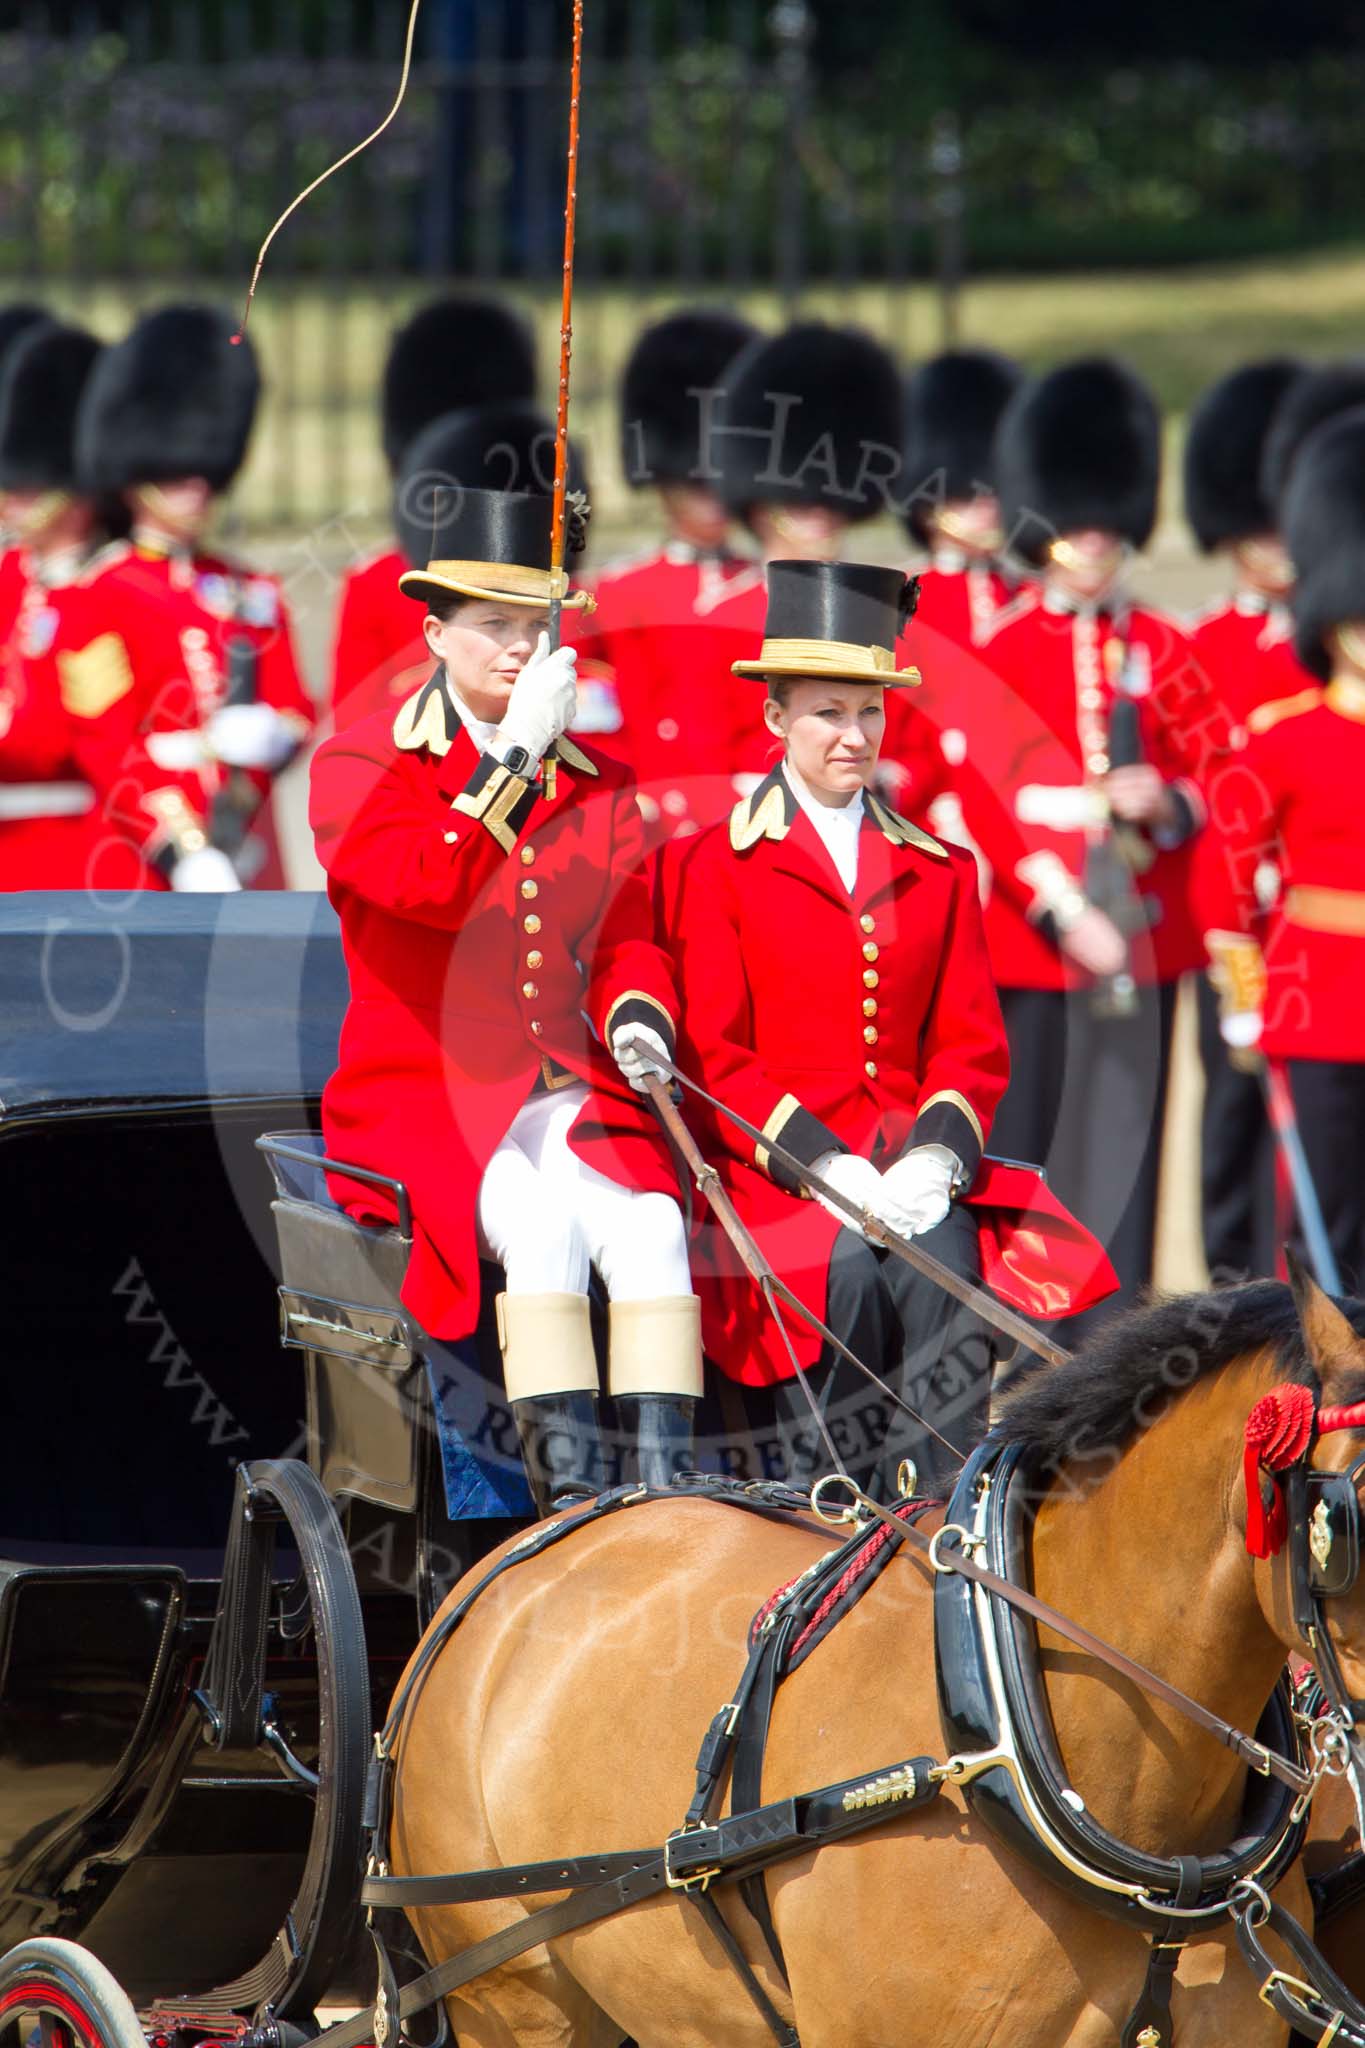 The Colonel's Review 2011: The second carriage passing the Colour on Horse Guards Parade, both coachman saluting the Colour..
Horse Guards Parade, Westminster,
London SW1,

United Kingdom,
on 04 June 2011 at 10:50, image #66